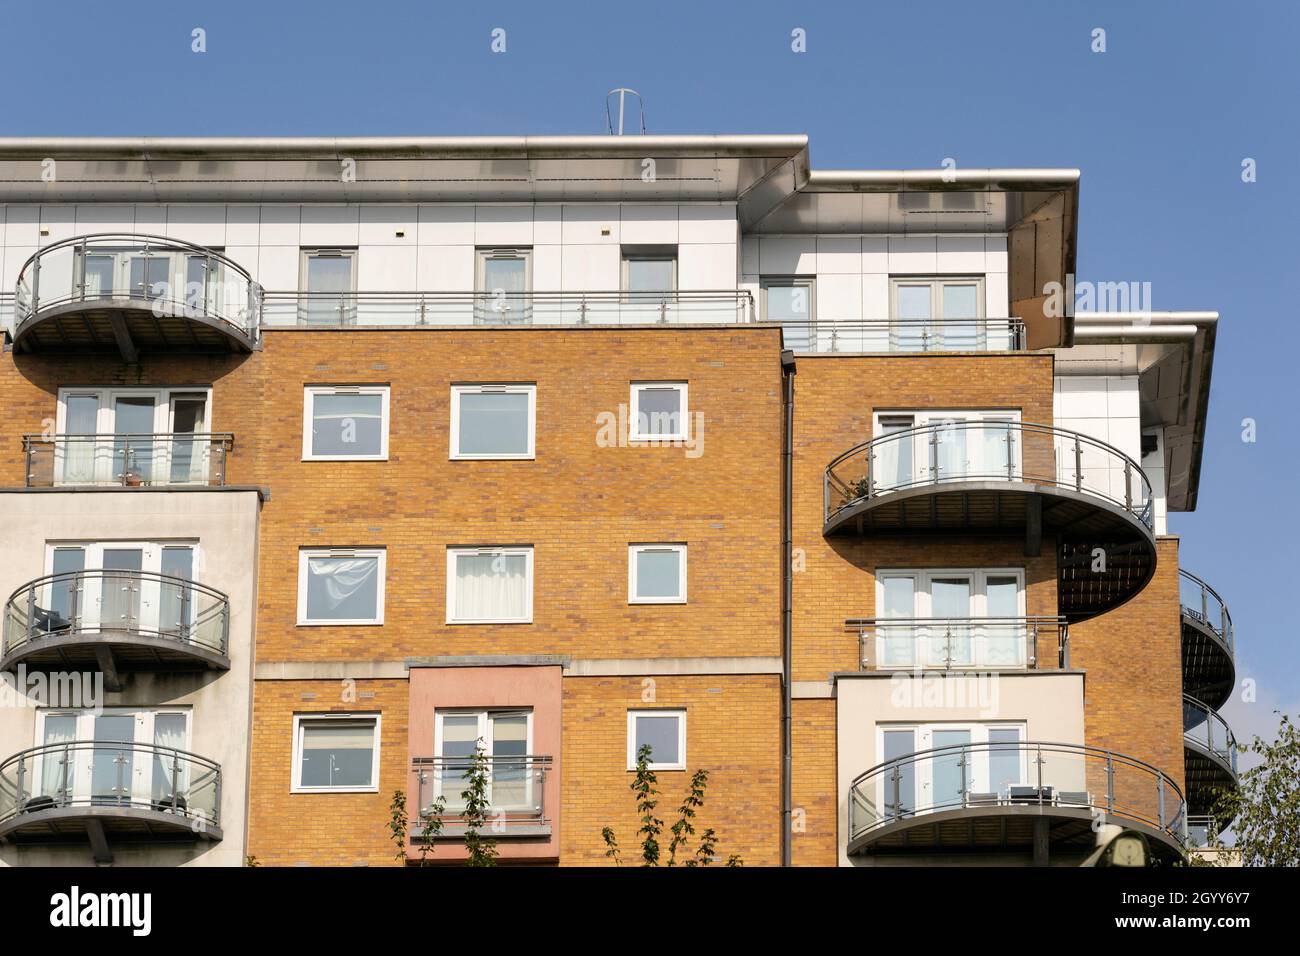 Blocks of flats in Winterthur Way needing aluminium composite cladding and wooden balcony decking to be replaced over fire risk fears. Basingstoke, UK Stock Photo